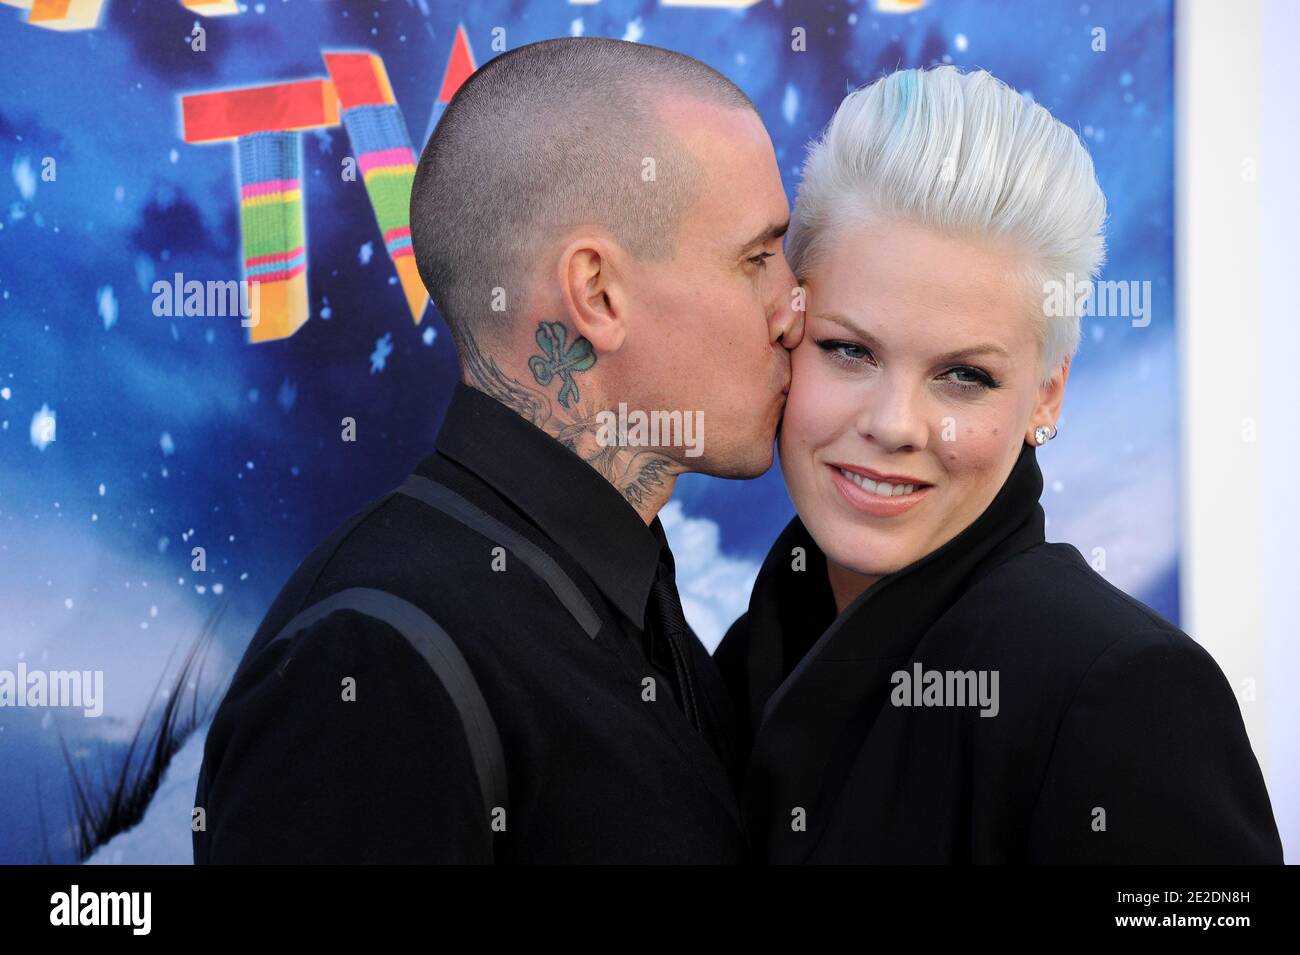 Carey Hart And Alecia Beth Moore Aka Pink Attends The World Premiere Of Warner Bros Happy Feet